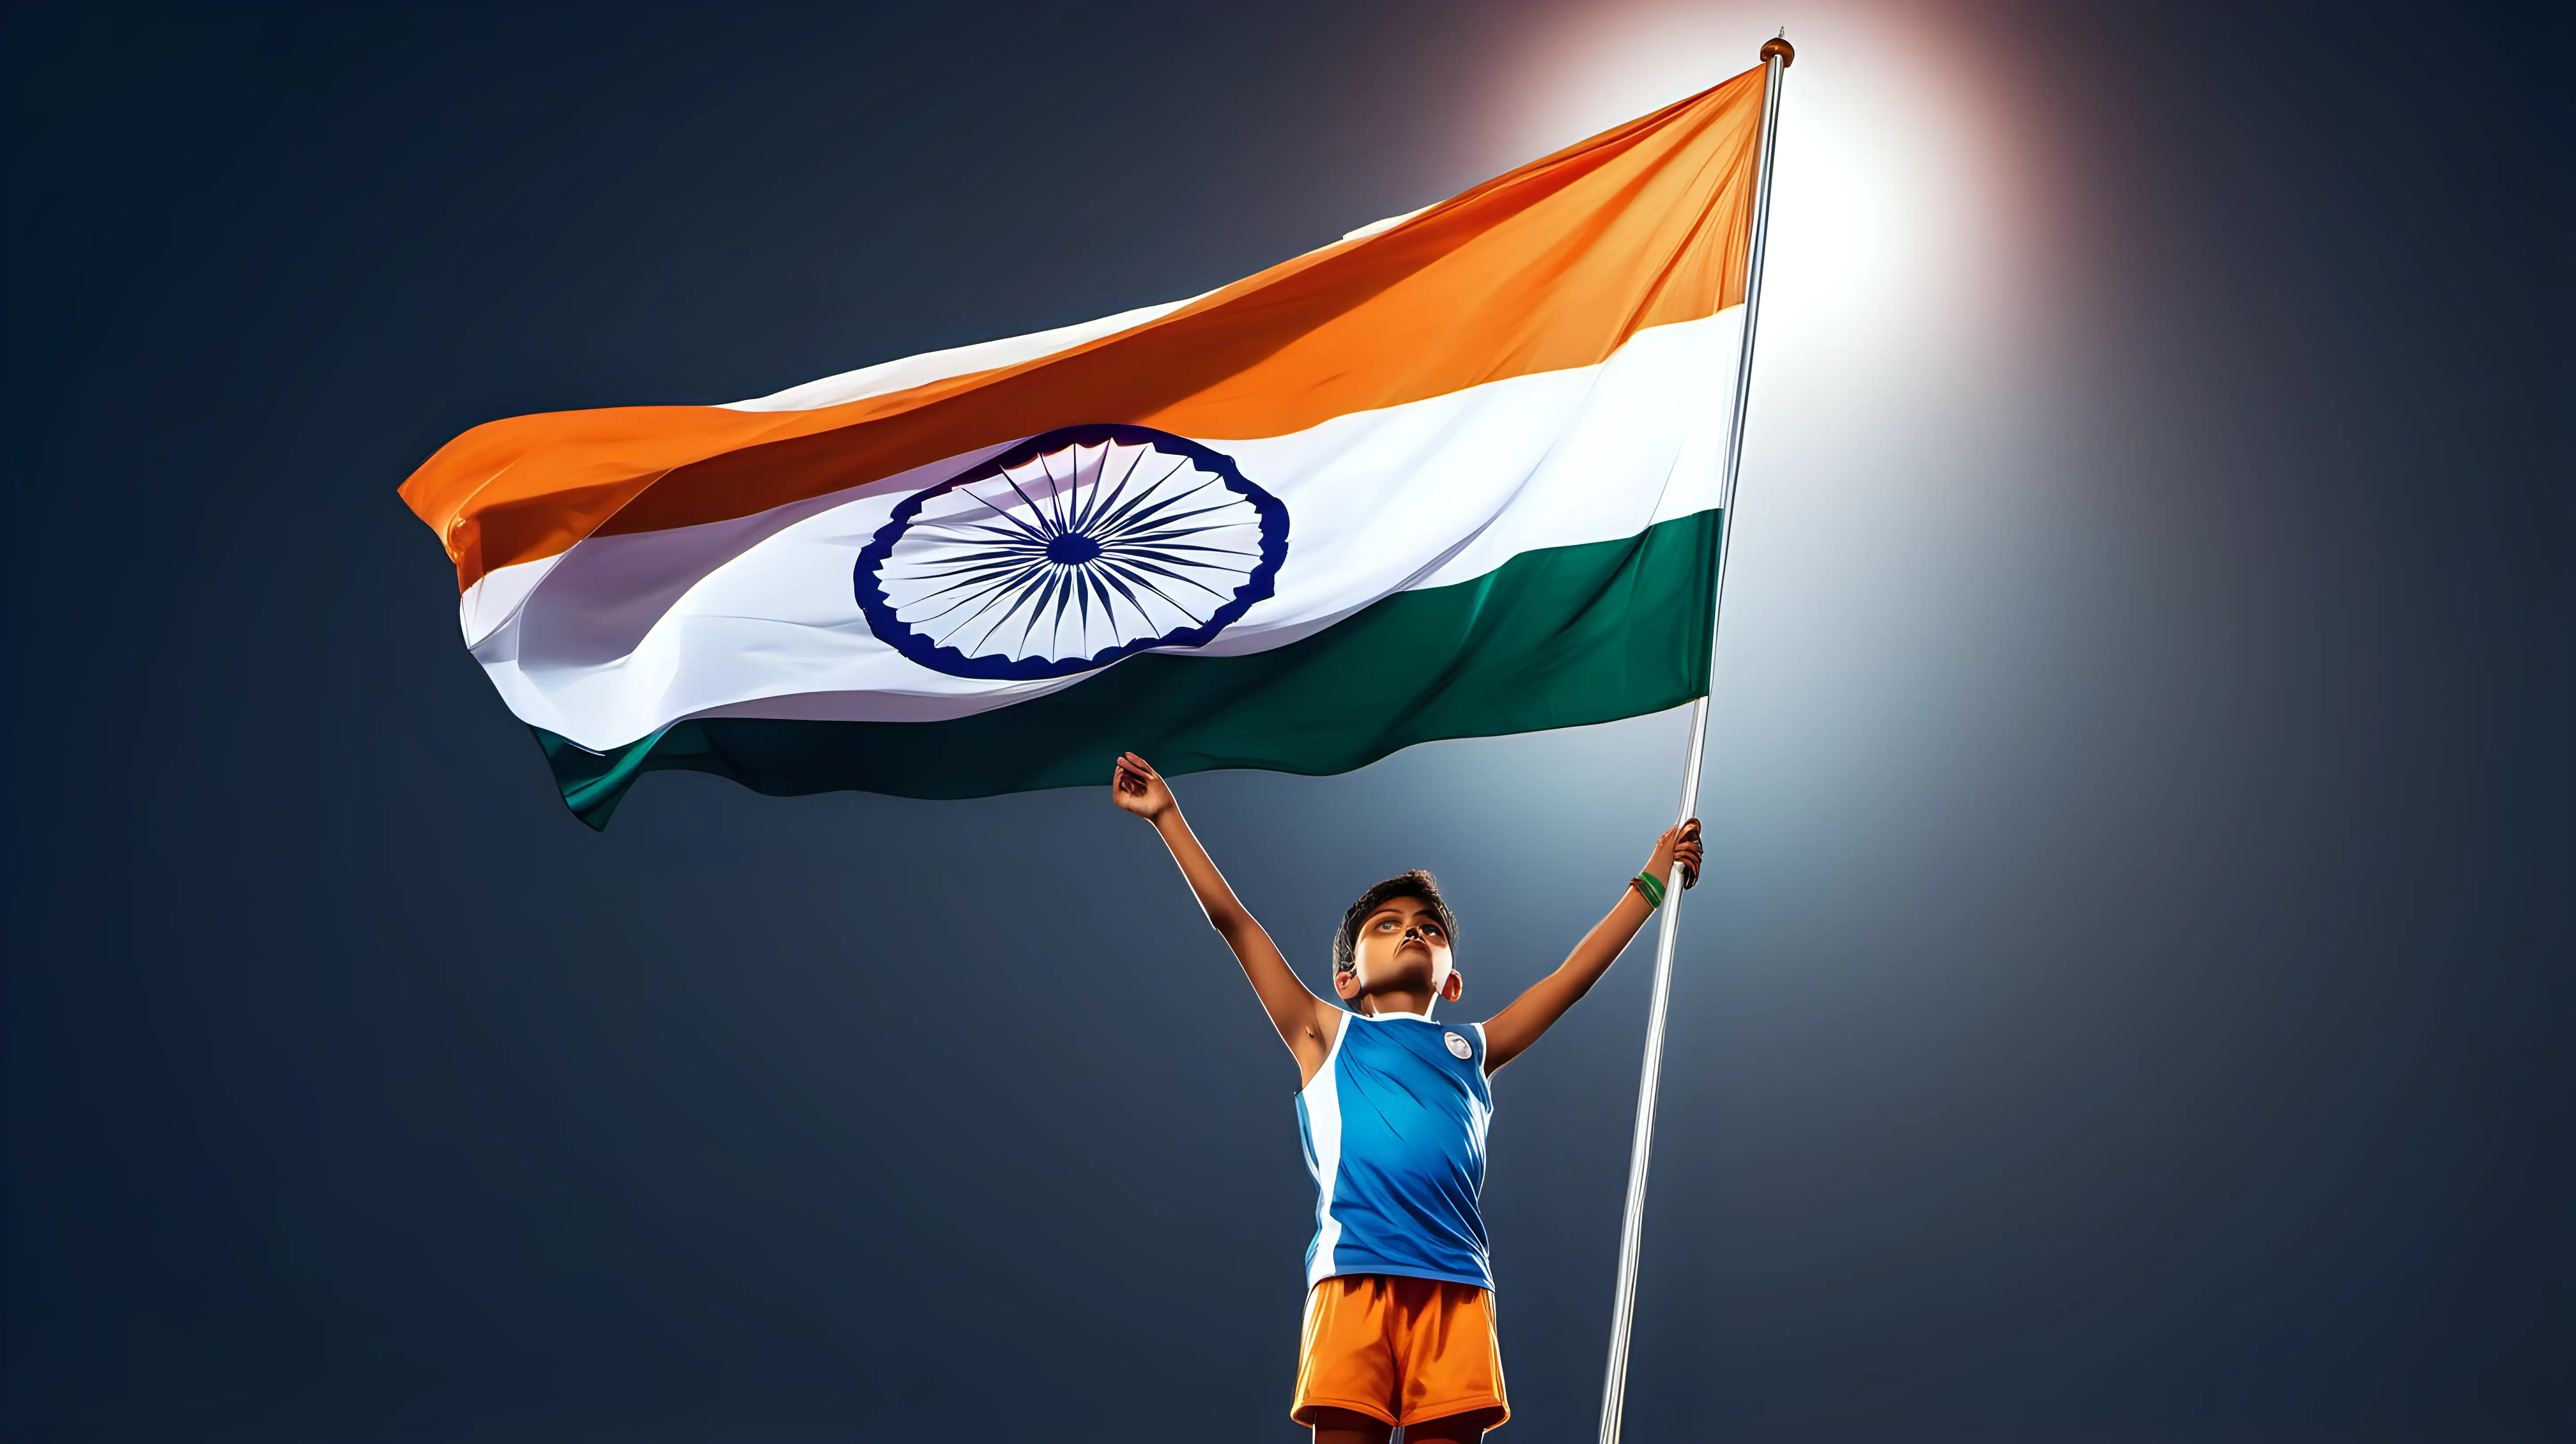 Young Athlete Raising Glowing Indian Flag in Patriotic Display